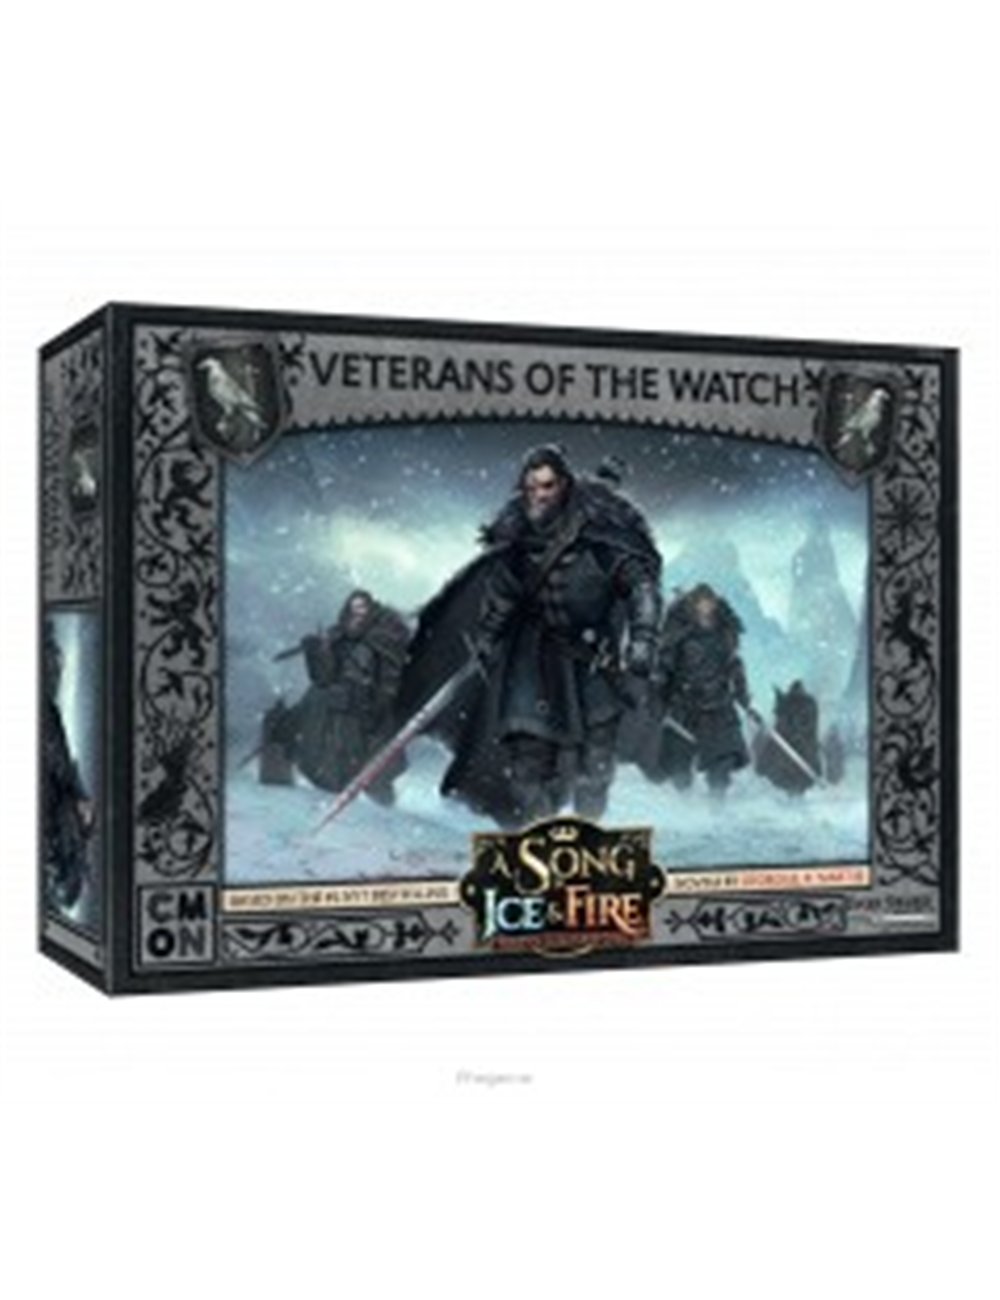 A SONG OF ICE & FIRE - Veterans Of The Watch